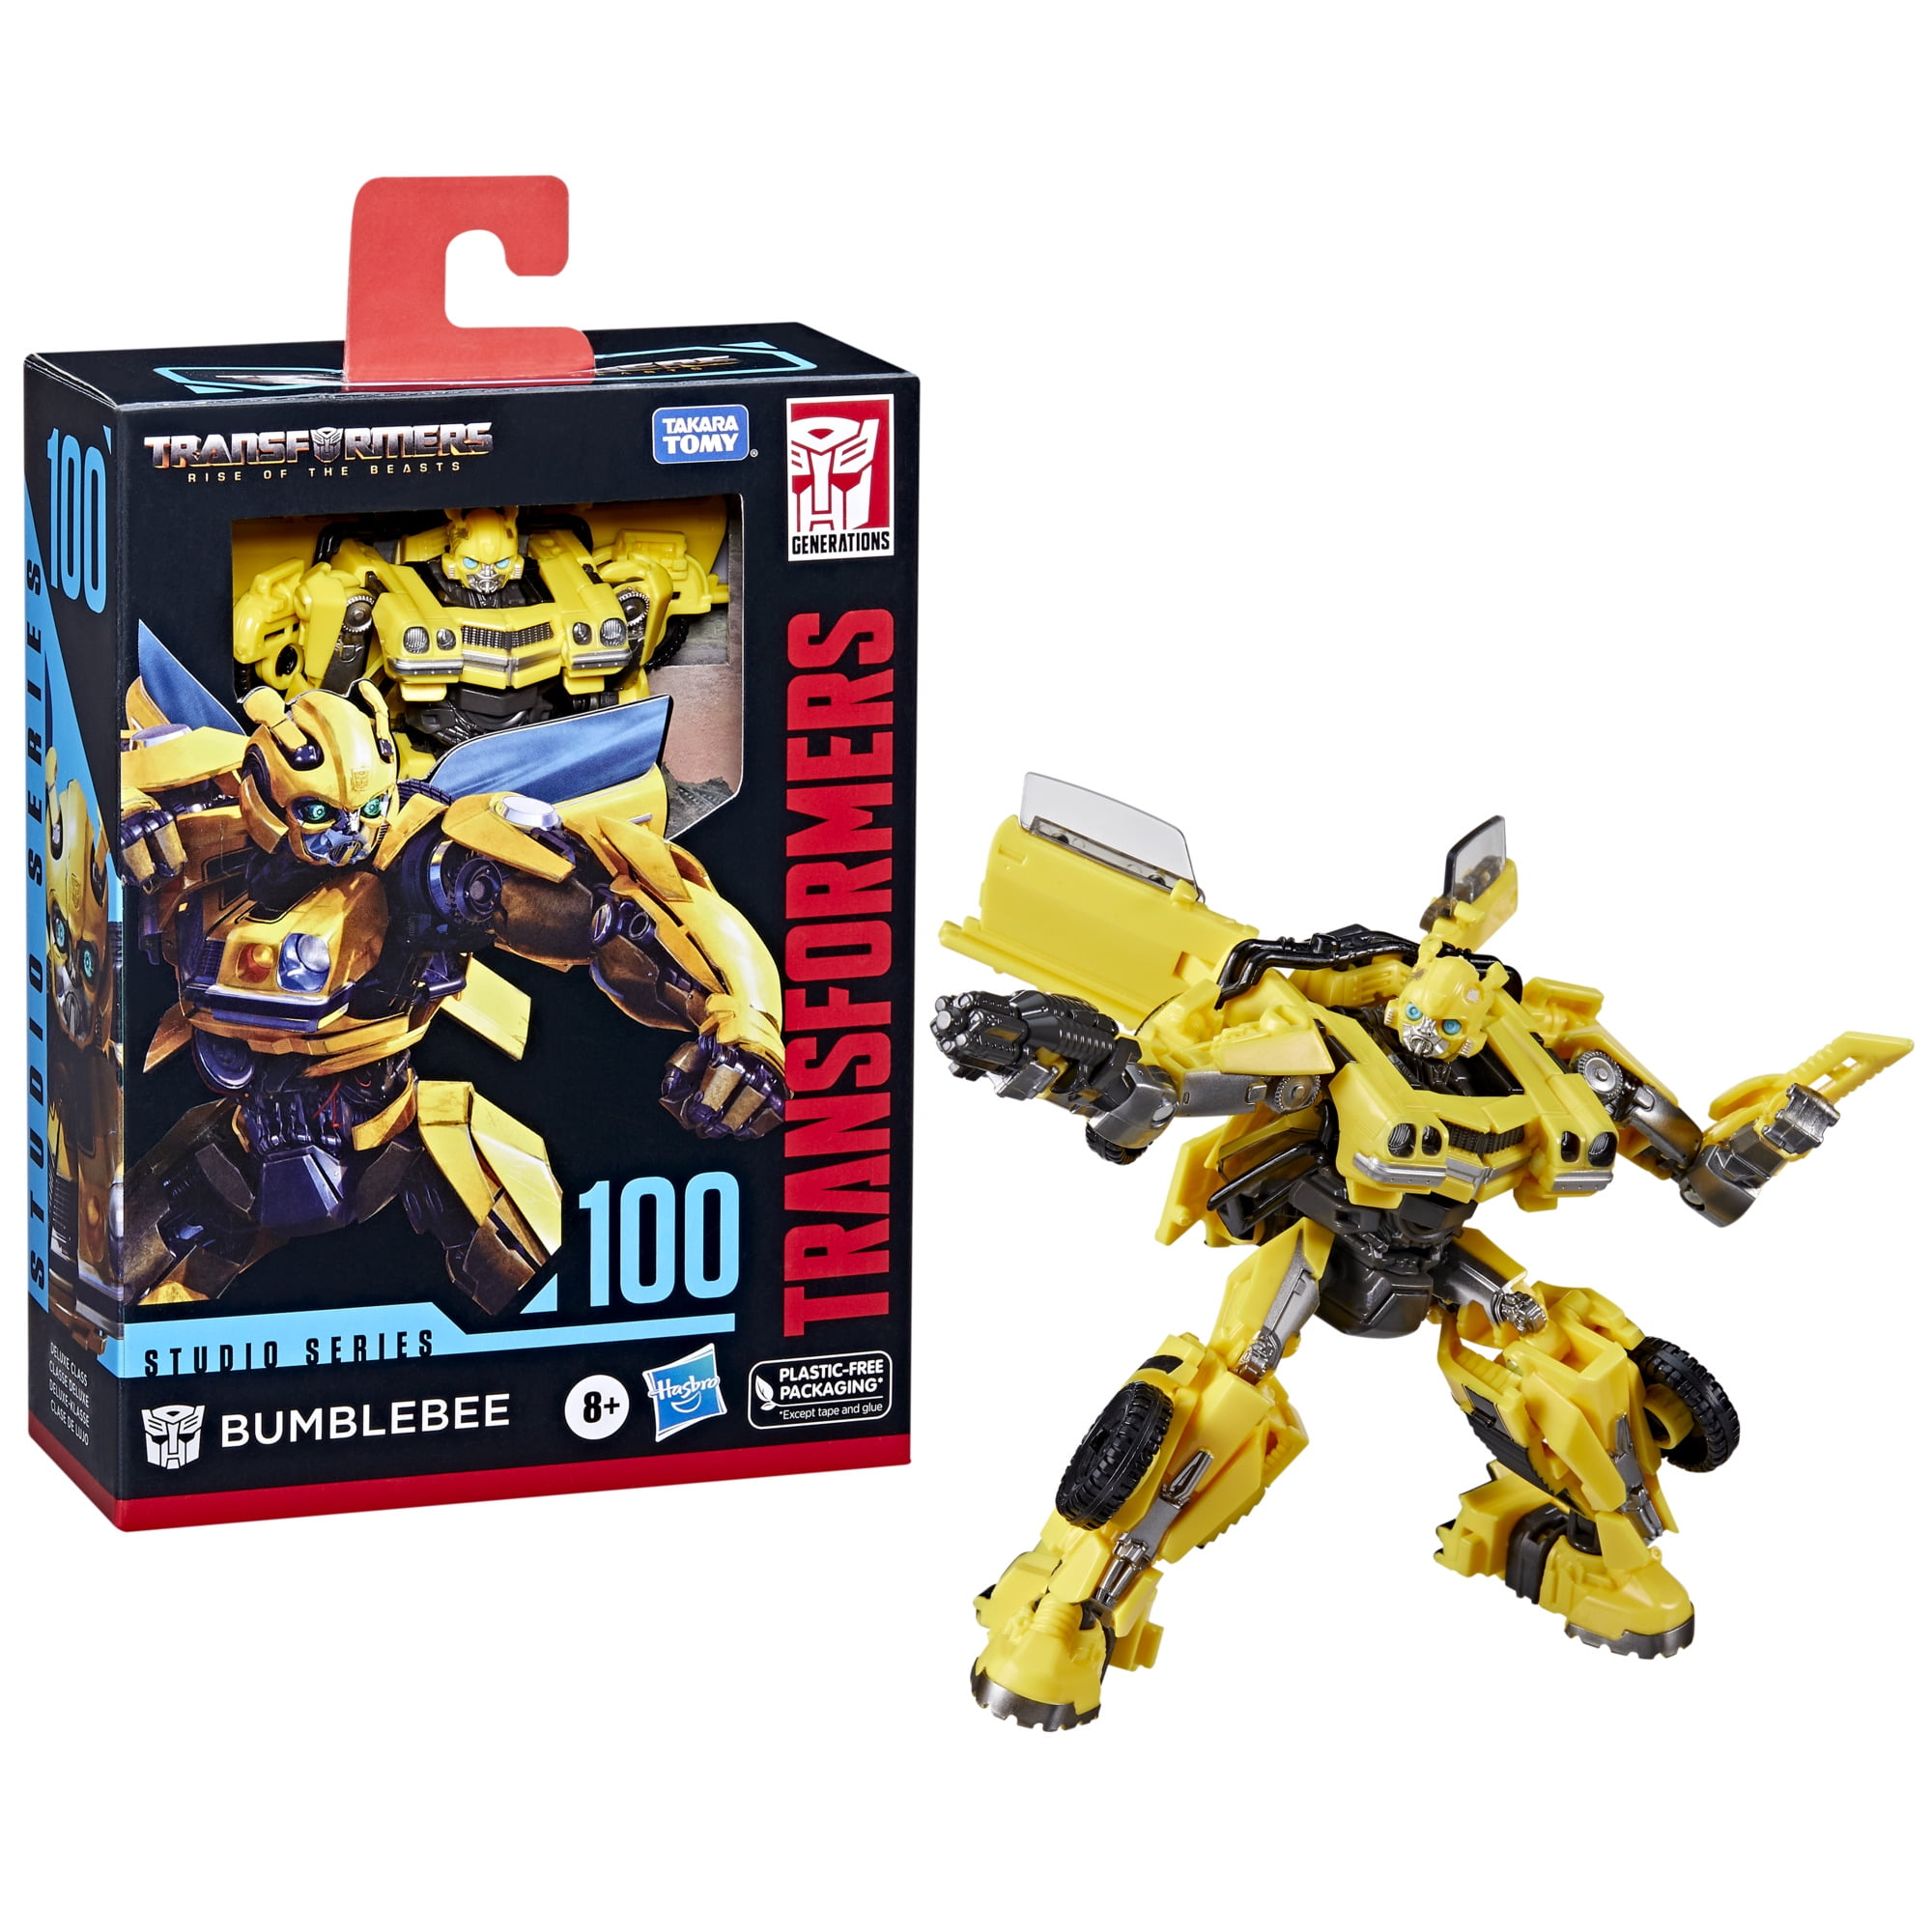 TRANSFORMERS Toys Studio Series 84 Deluxe Bumblebee Ironhide Action Figure,  8 an